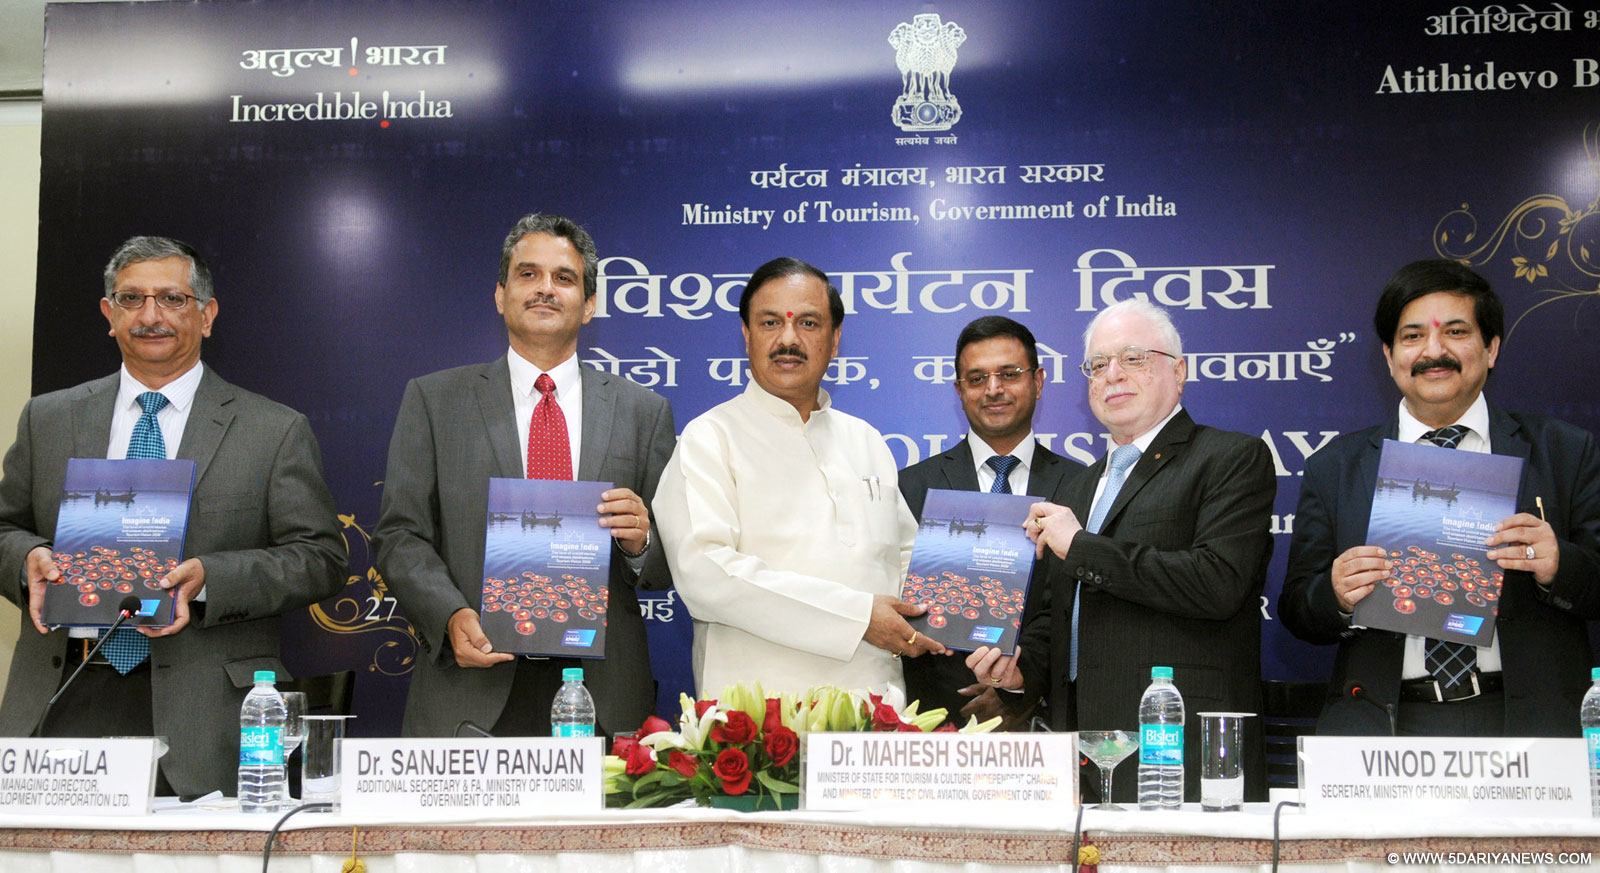 The Minister of State for Culture (Independent Charge), Tourism (Independent Charge) and Civil Aviation, Dr. Mahesh Sharma releasing the “Discover India” fares of Air India & other Airlines, on the occasion of World Tourism Day on the Topic of “One Billion Tourist One Billion Opportunities”, in New Delhi on September 27, 2015. The Secretary of Tourism, Shri Vinod Zutshi and other dignitaries are also seen.